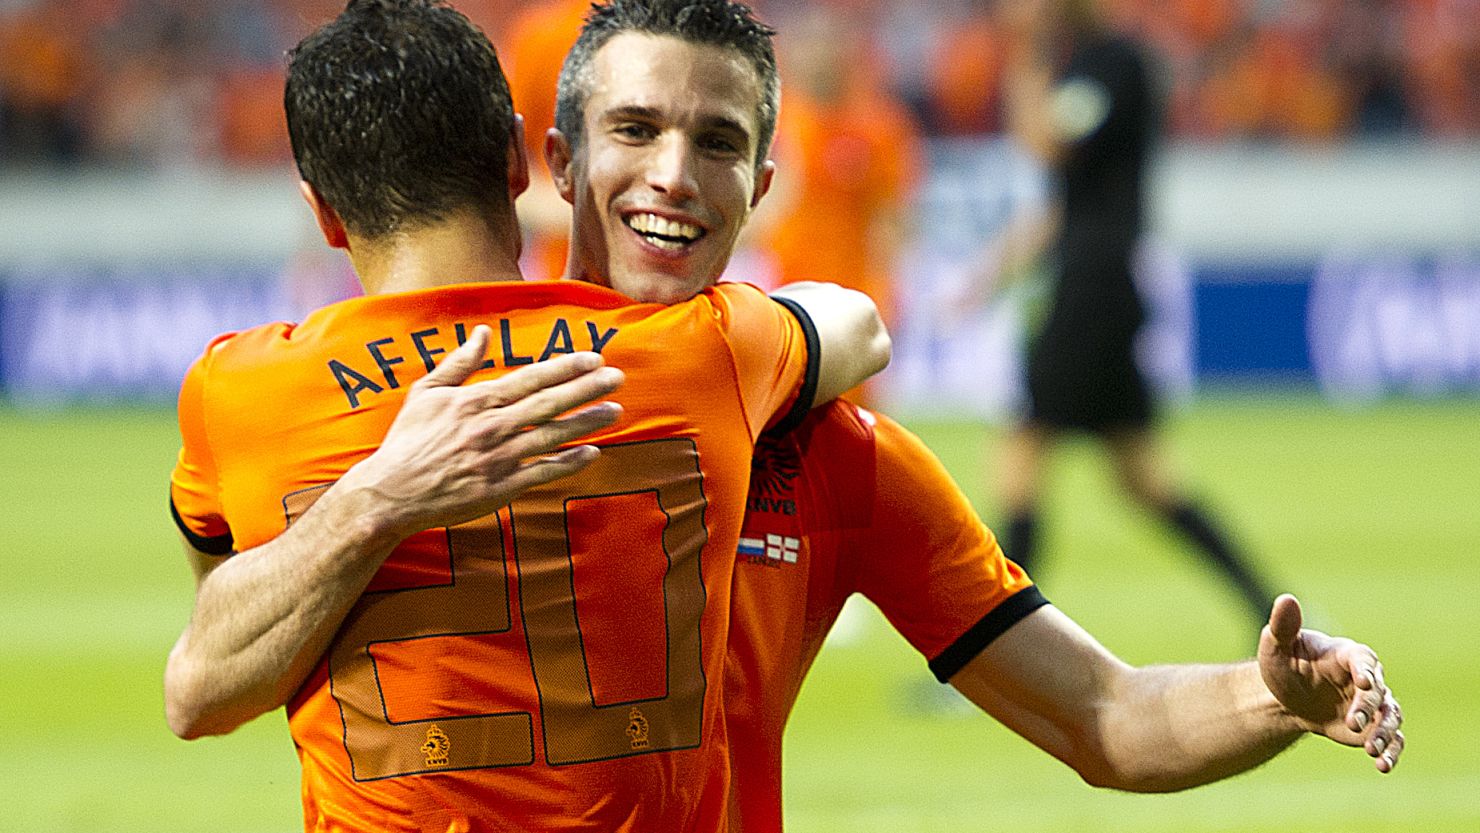 Robin van Persie celebrates with Ibrahim Afellay, who also scored twice in the Netherlands' 6-0 win against Northern Ireland.